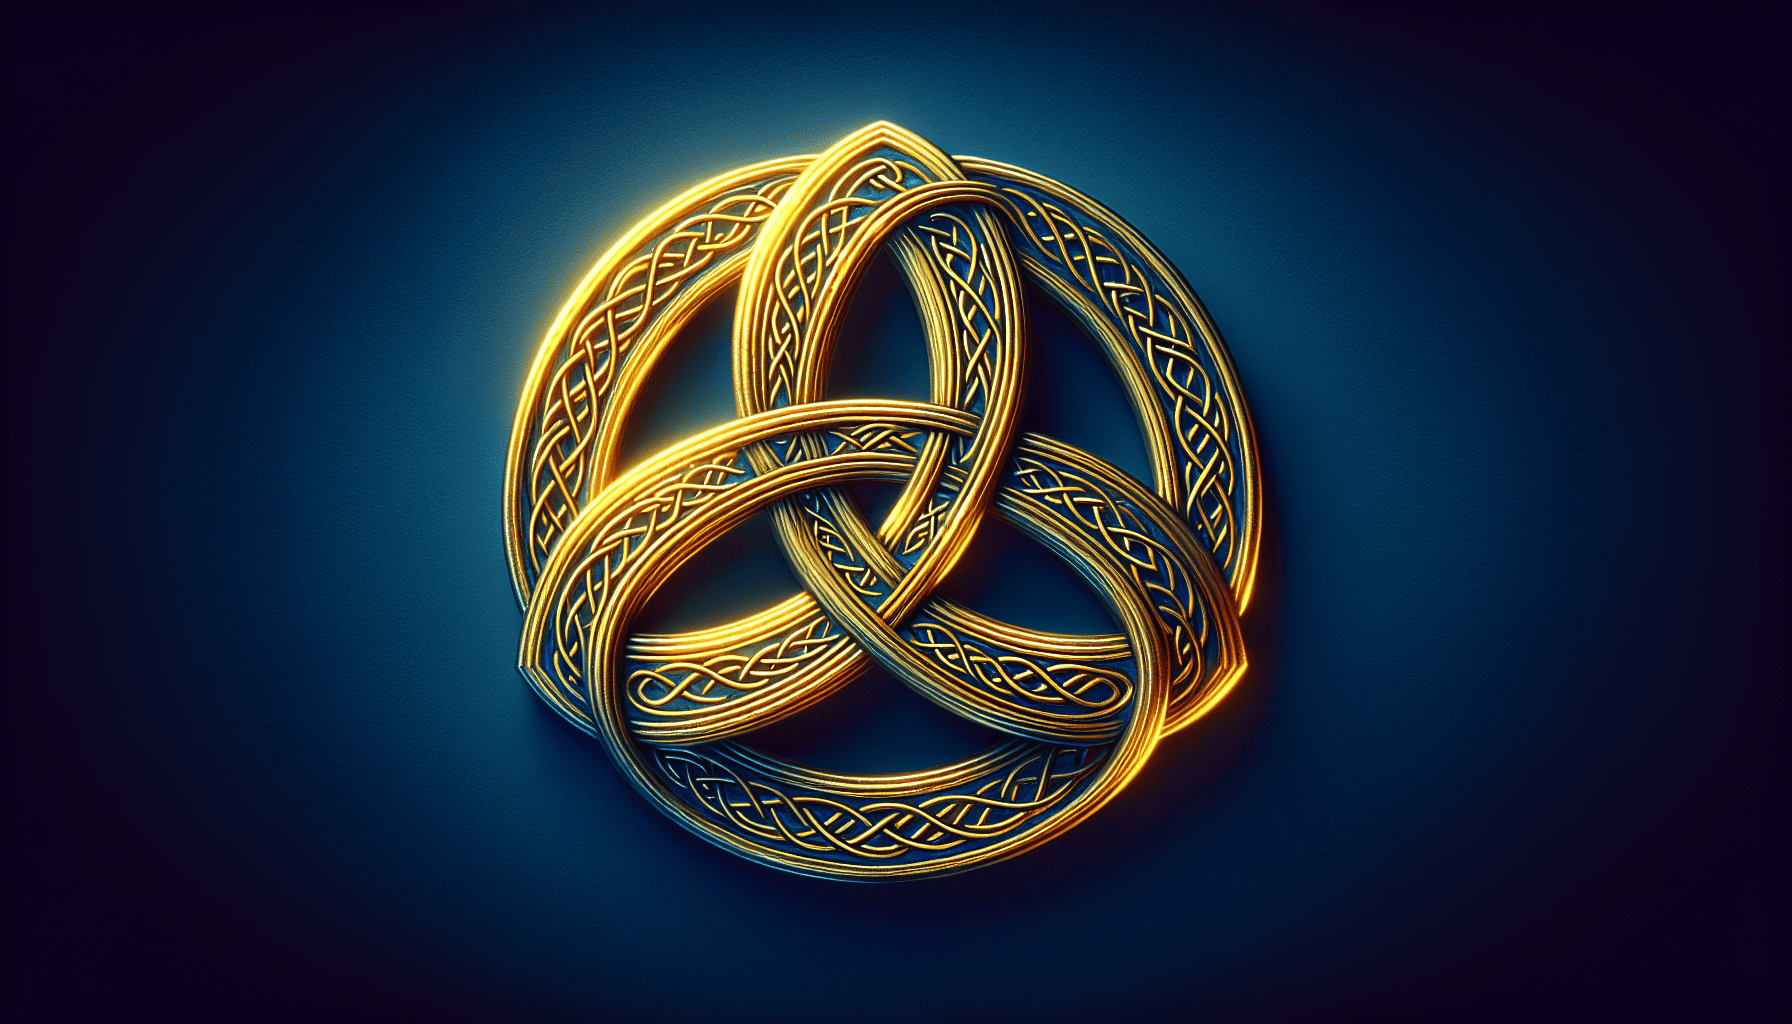 A beautiful illustration of a Celtic trinity knot symbolizing unity, protection, and eternity